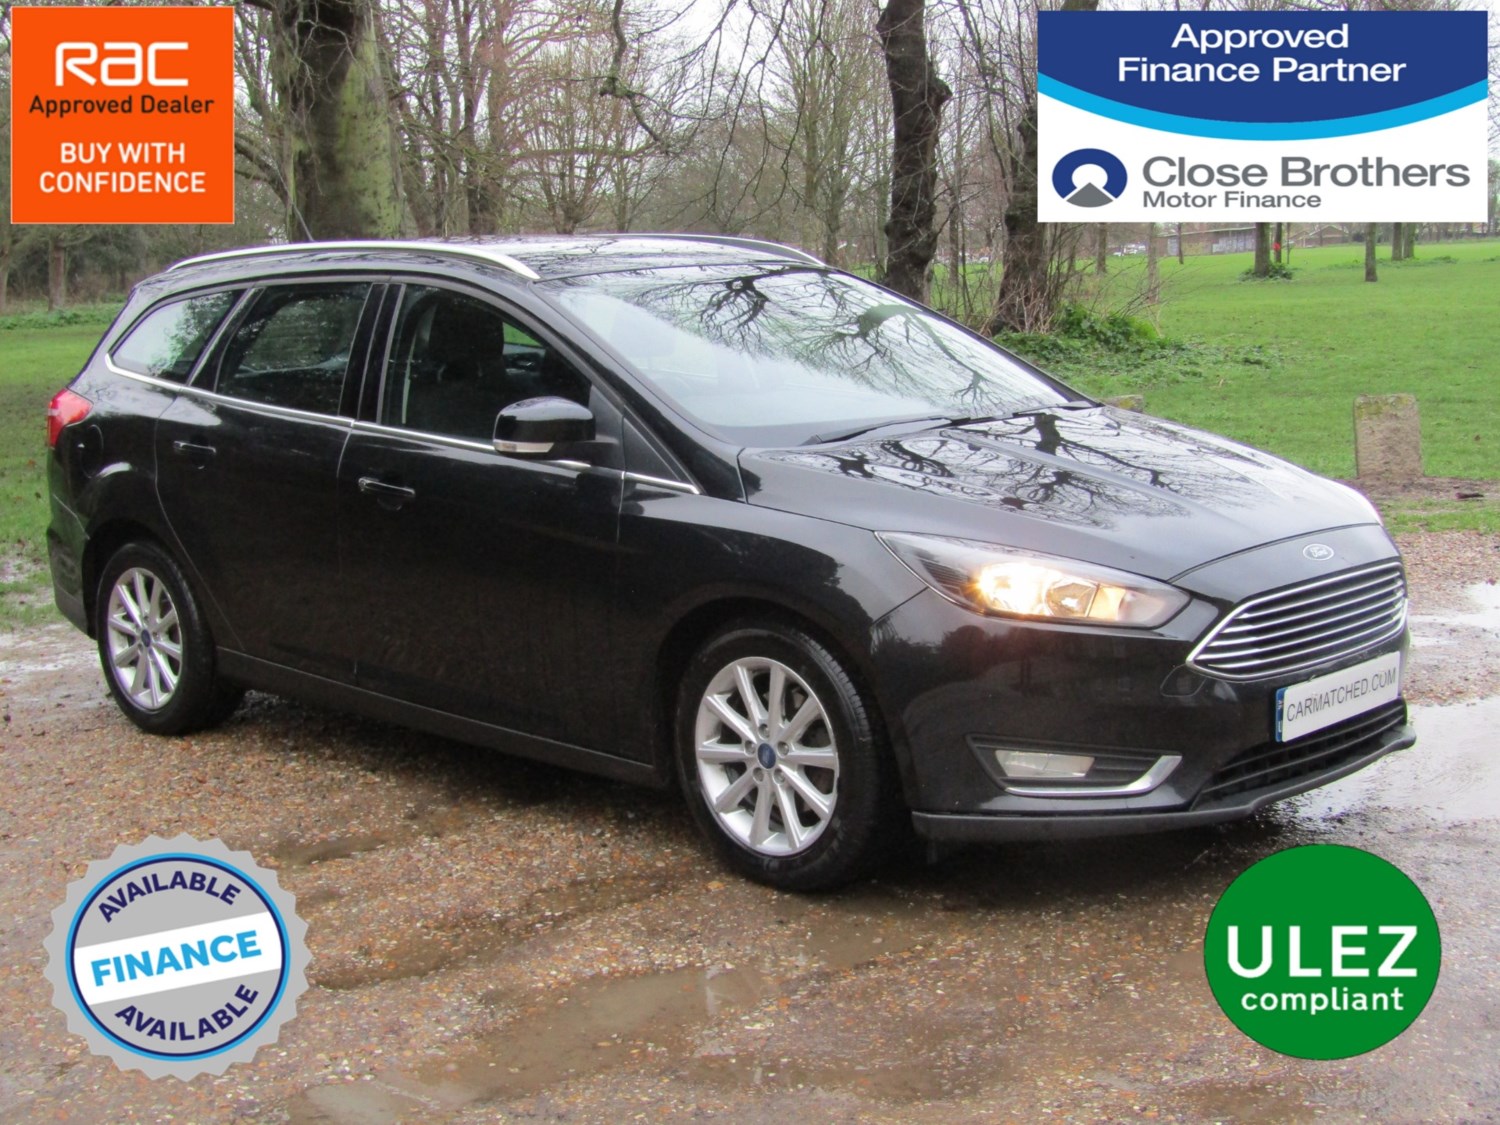 2015 (65) Ford Focus 1.5 TDCi 120 Titanium 5dr For Sale In Broadstairs, Kent